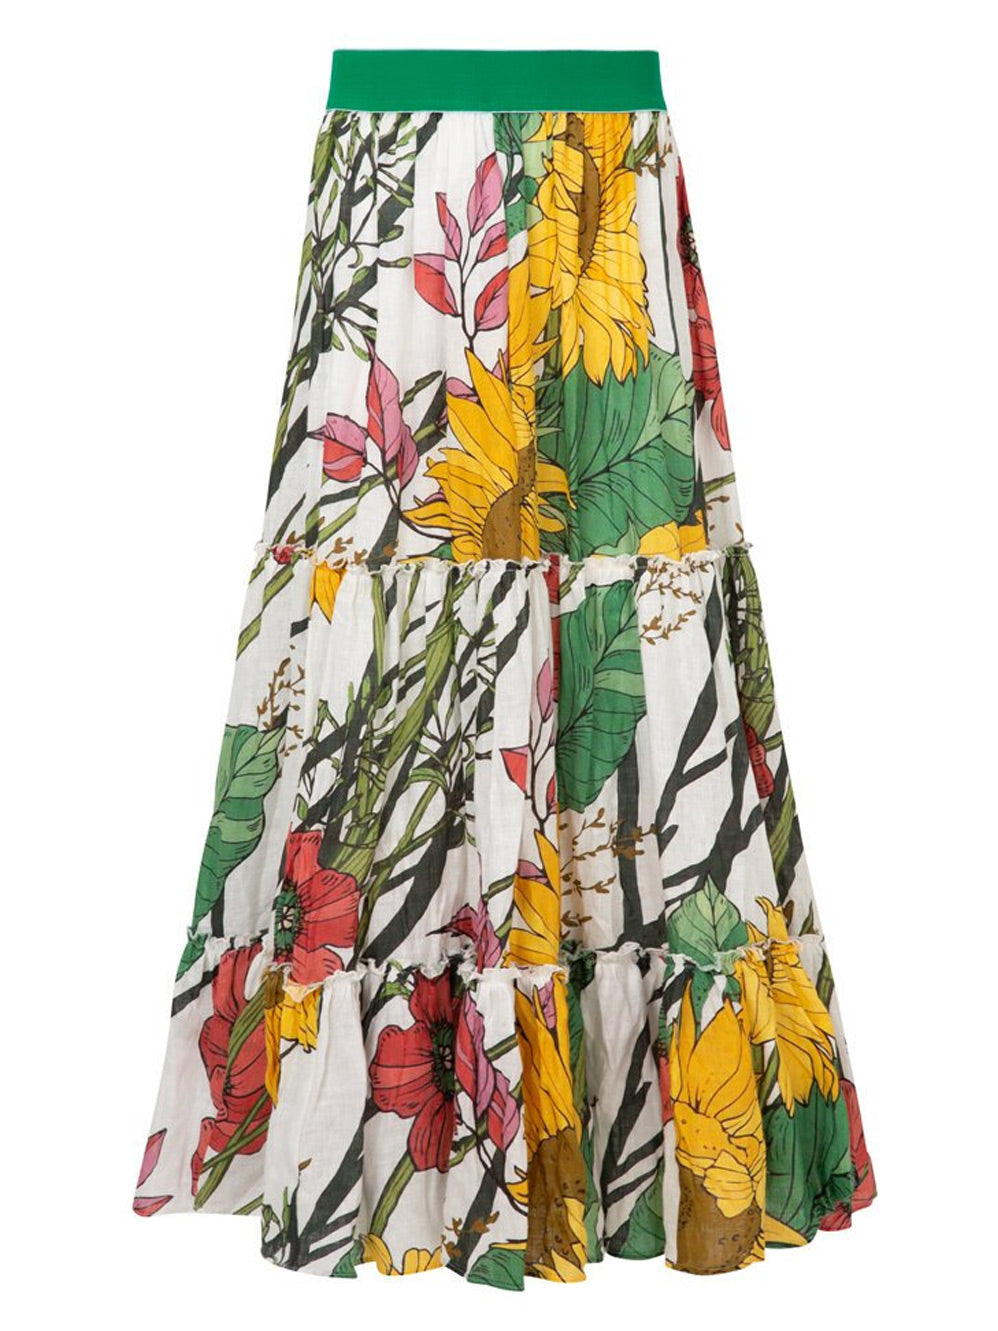 CURATE BY TRELISE COOPER LAWN PARTY SKIRT